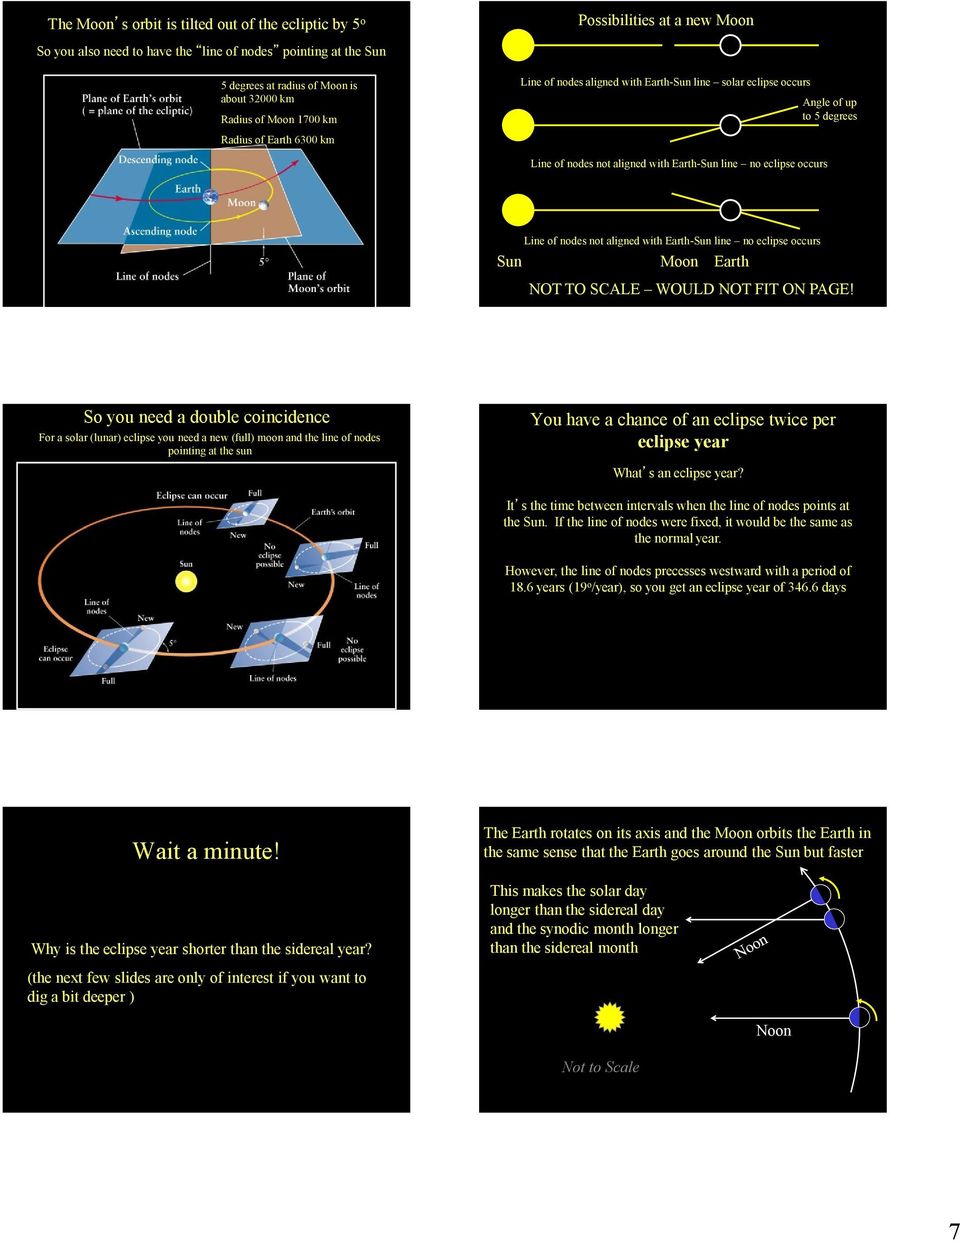 nodes not aligned with Earth-Sun line no eclipse occurs Sun Moon Earth NOT TO SCALE WOULD NOT FIT ON PAGE!